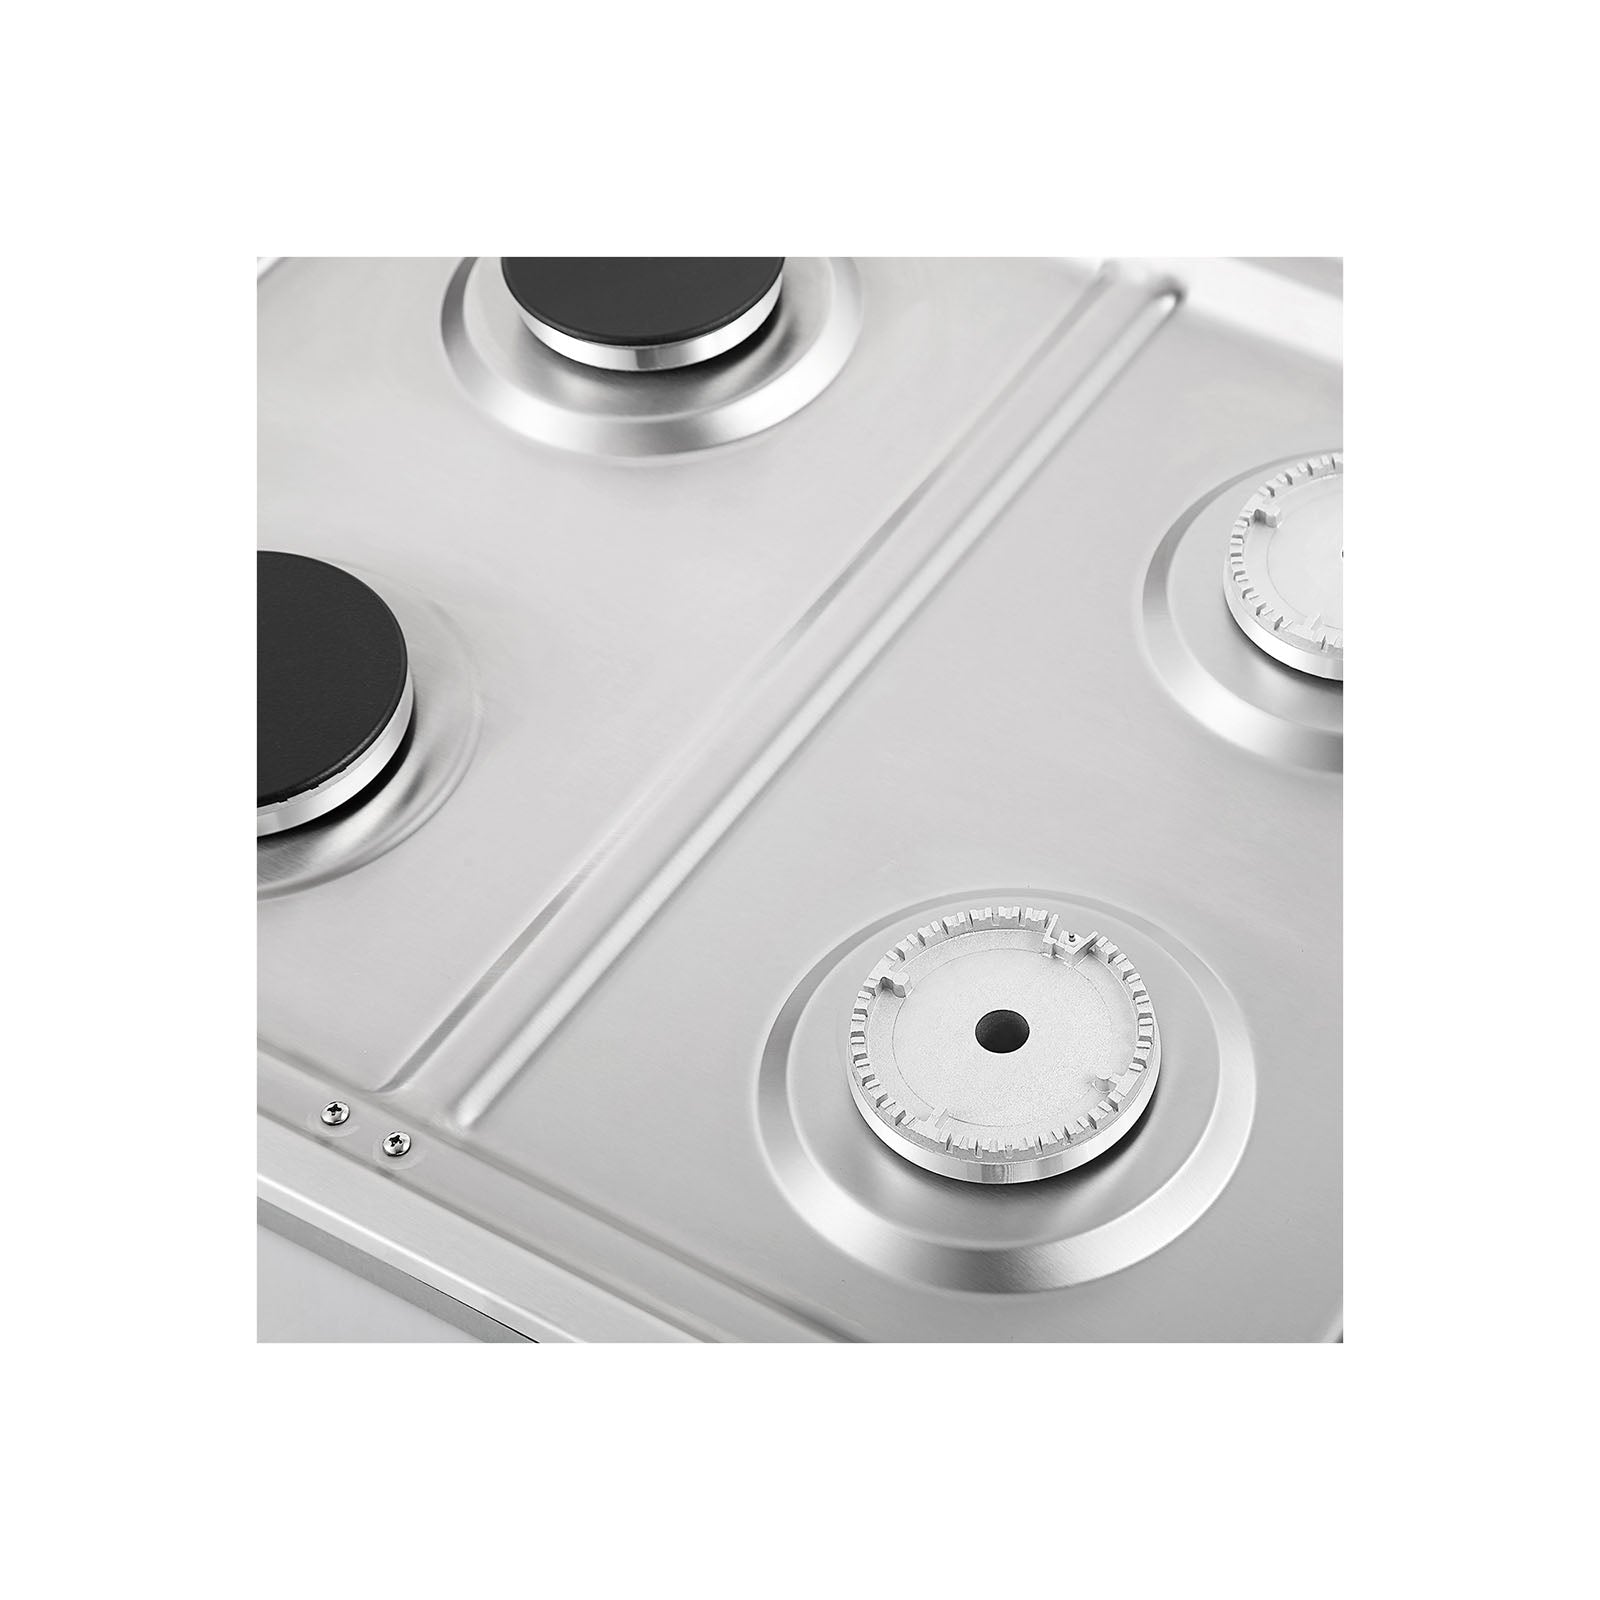 Empava 30 in. Built-in Stainless Steel Gas Cooktop